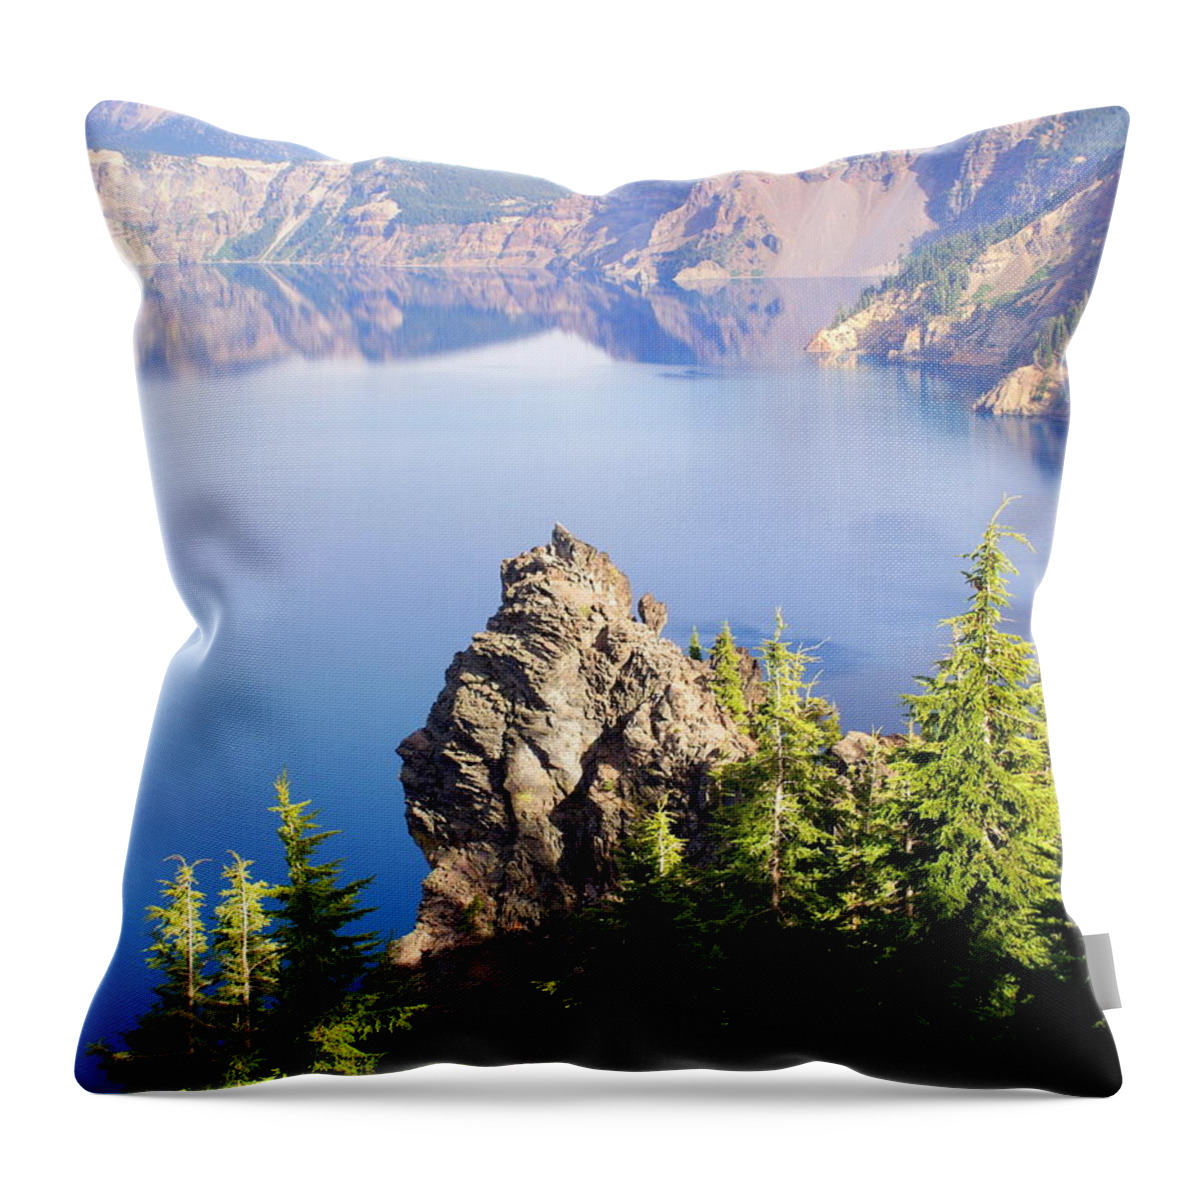 Crater Lake Throw Pillow featuring the photograph Crater Lake 4 by Marty Koch